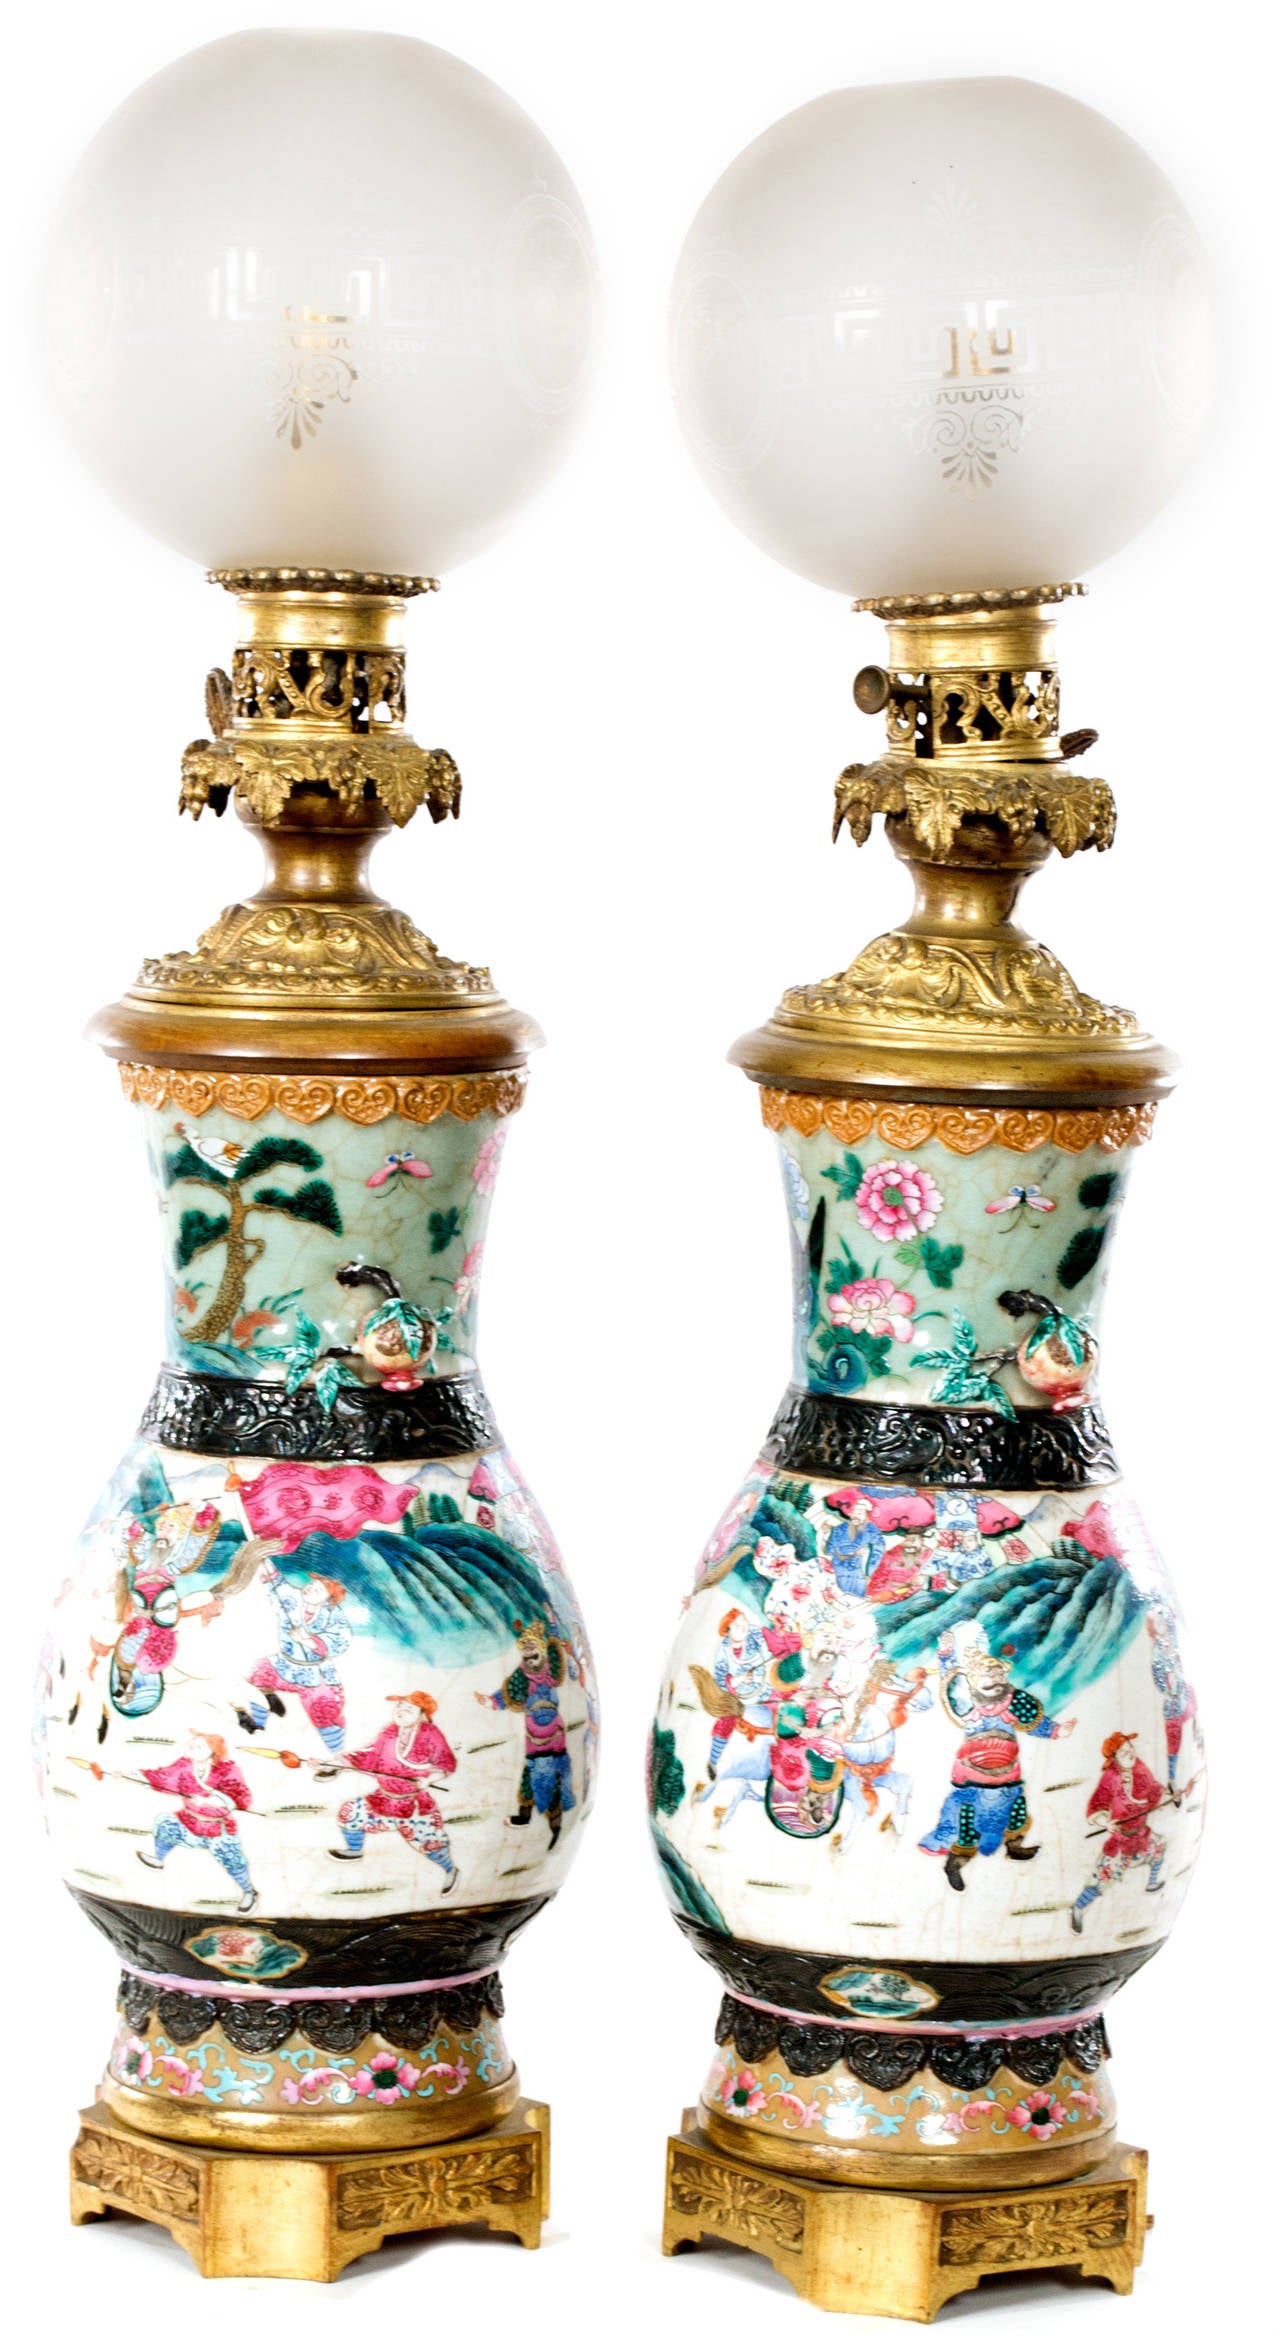 Brass Pair of Famille Rose Late 19th Century Chinese Porcelain Lamped Vases